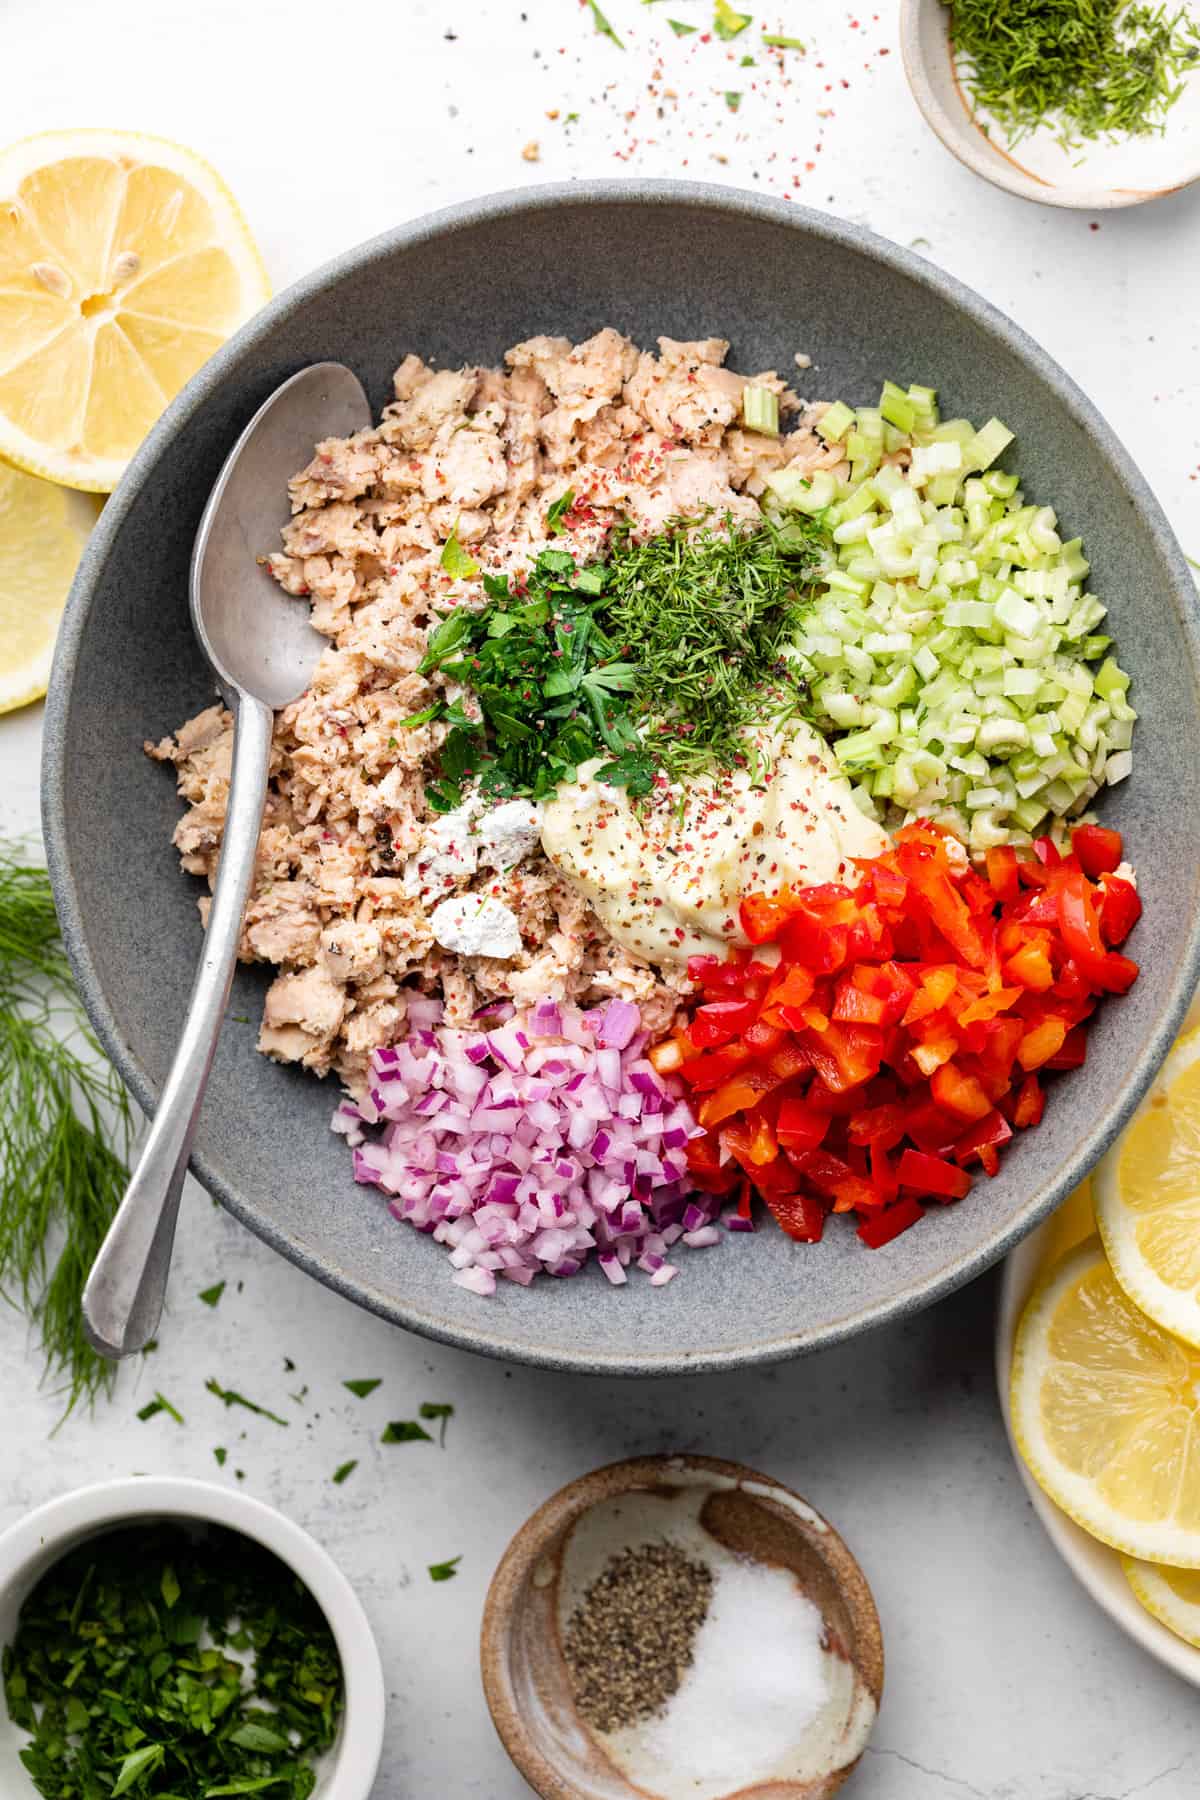 salmon salad ingredients in a mixing bowl